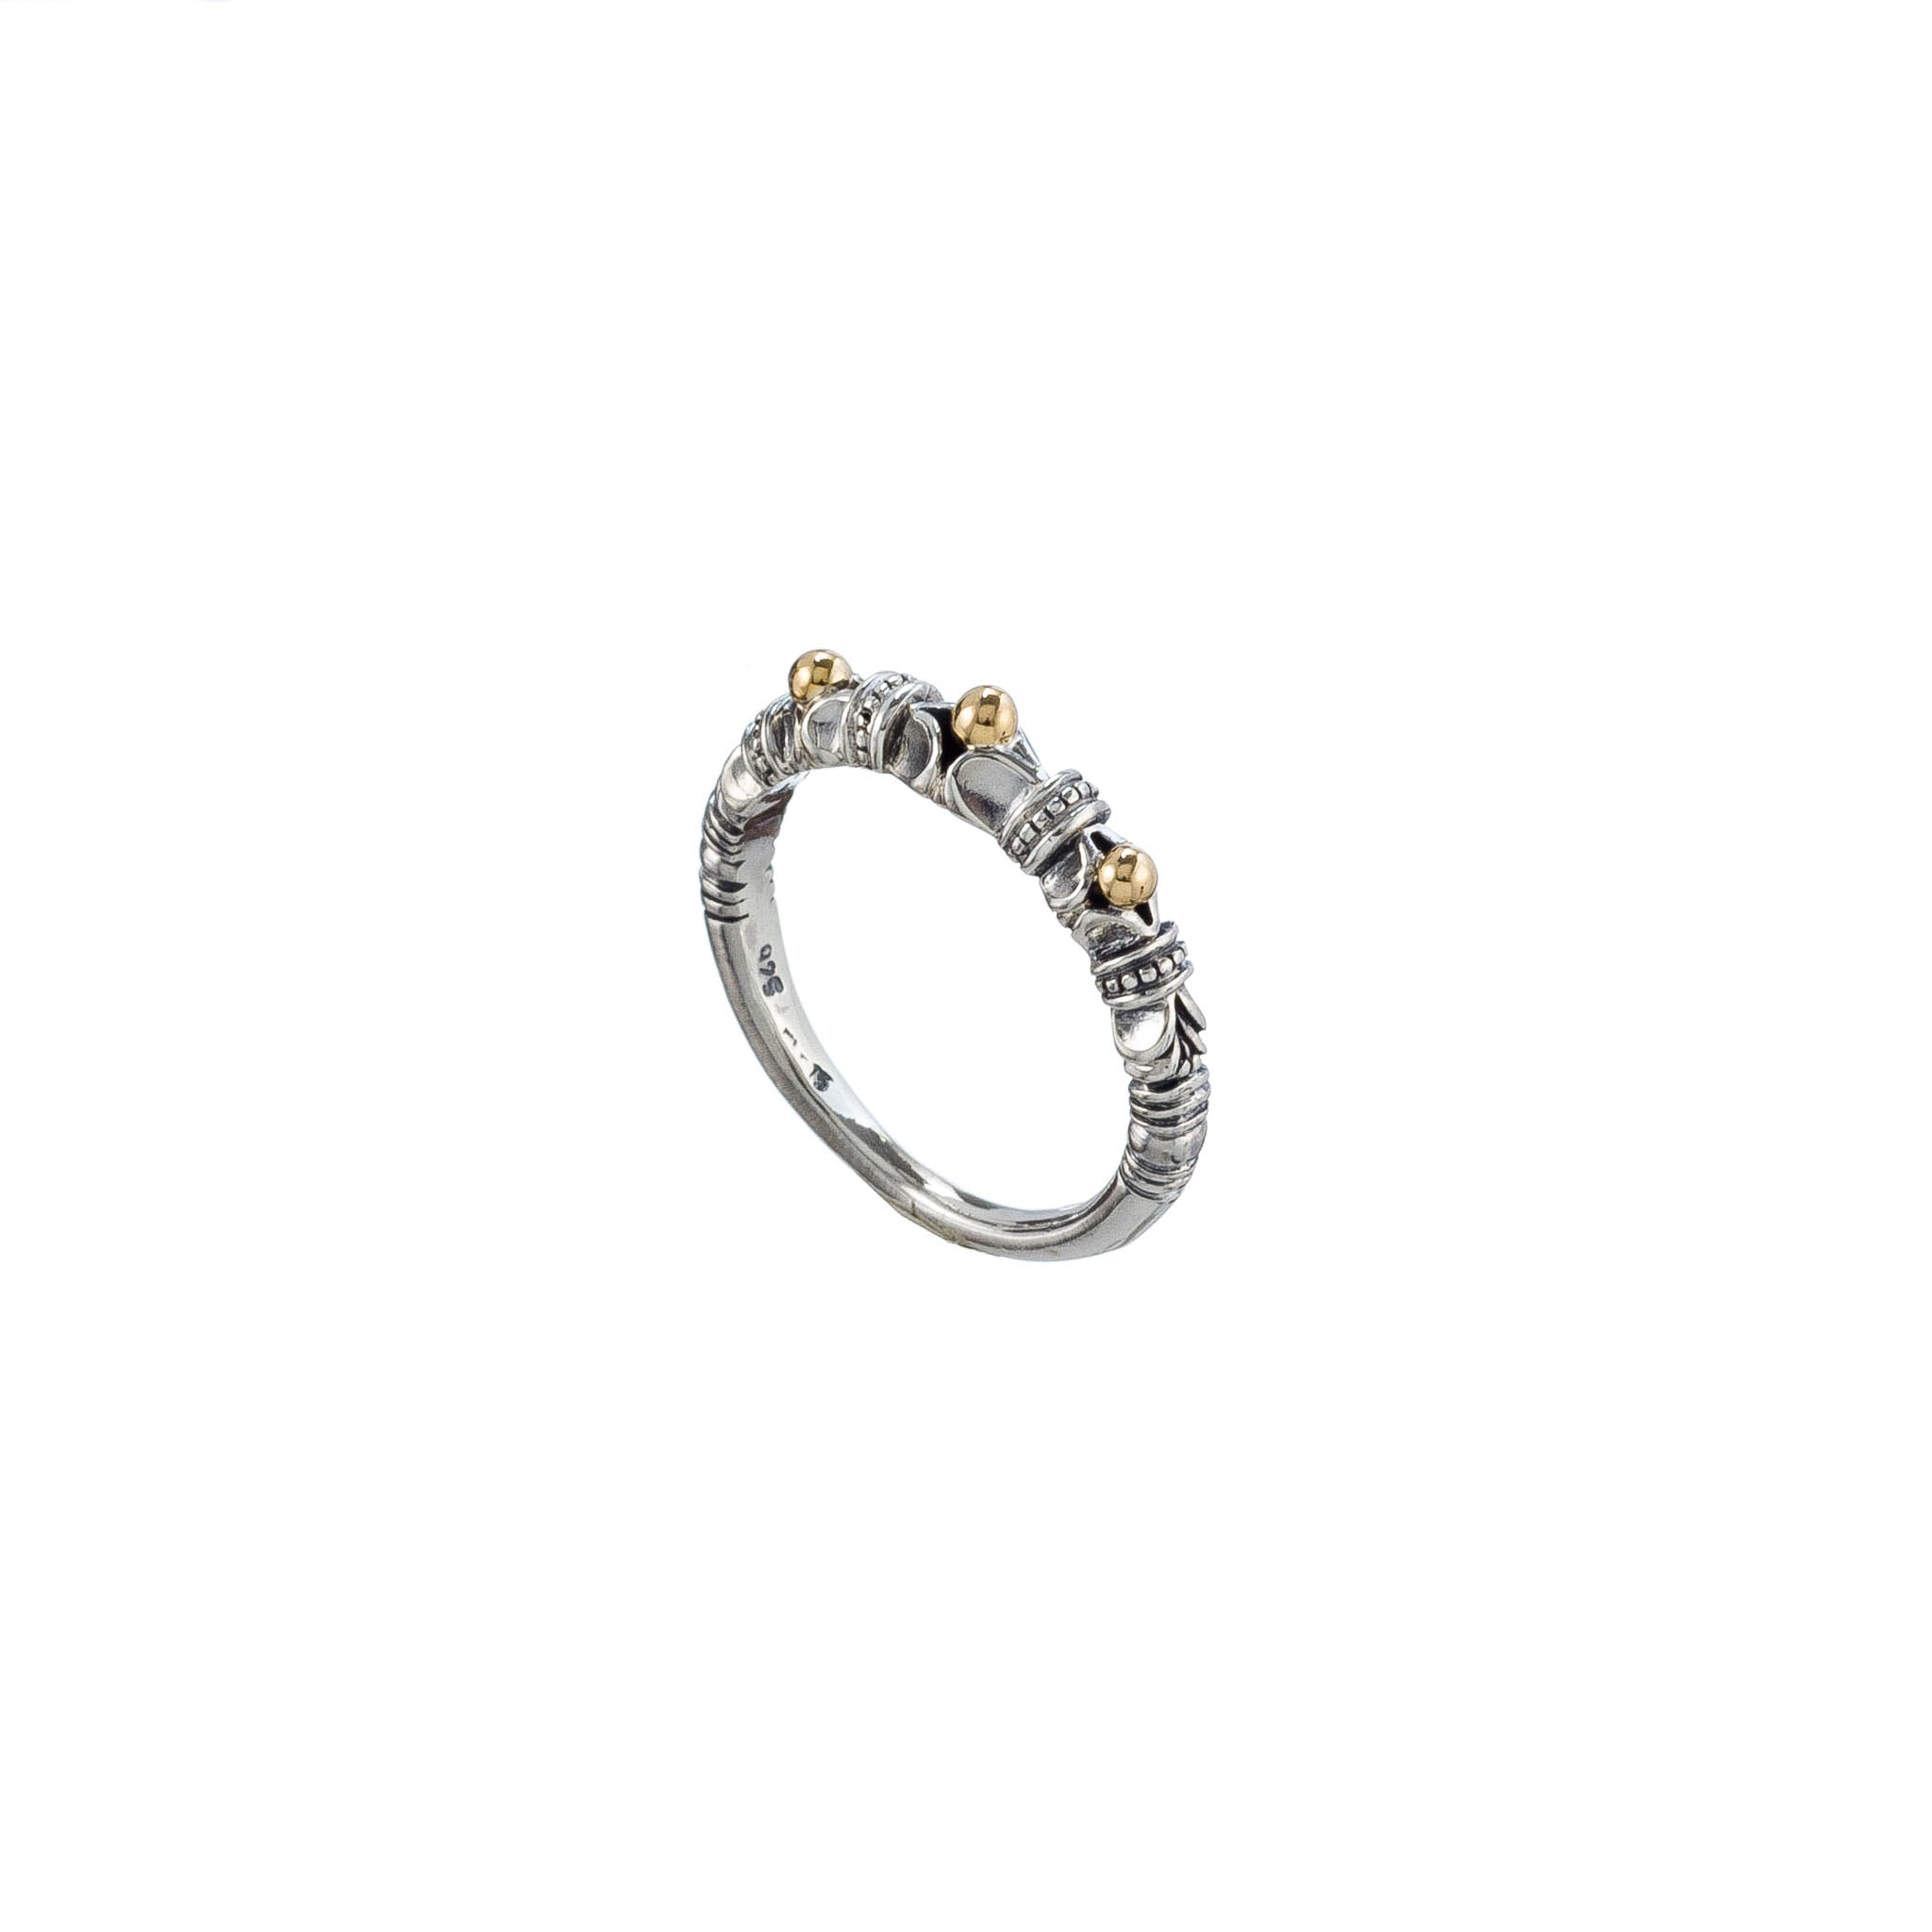 Kassandra Band ring in sterling silver with 18K Gold details